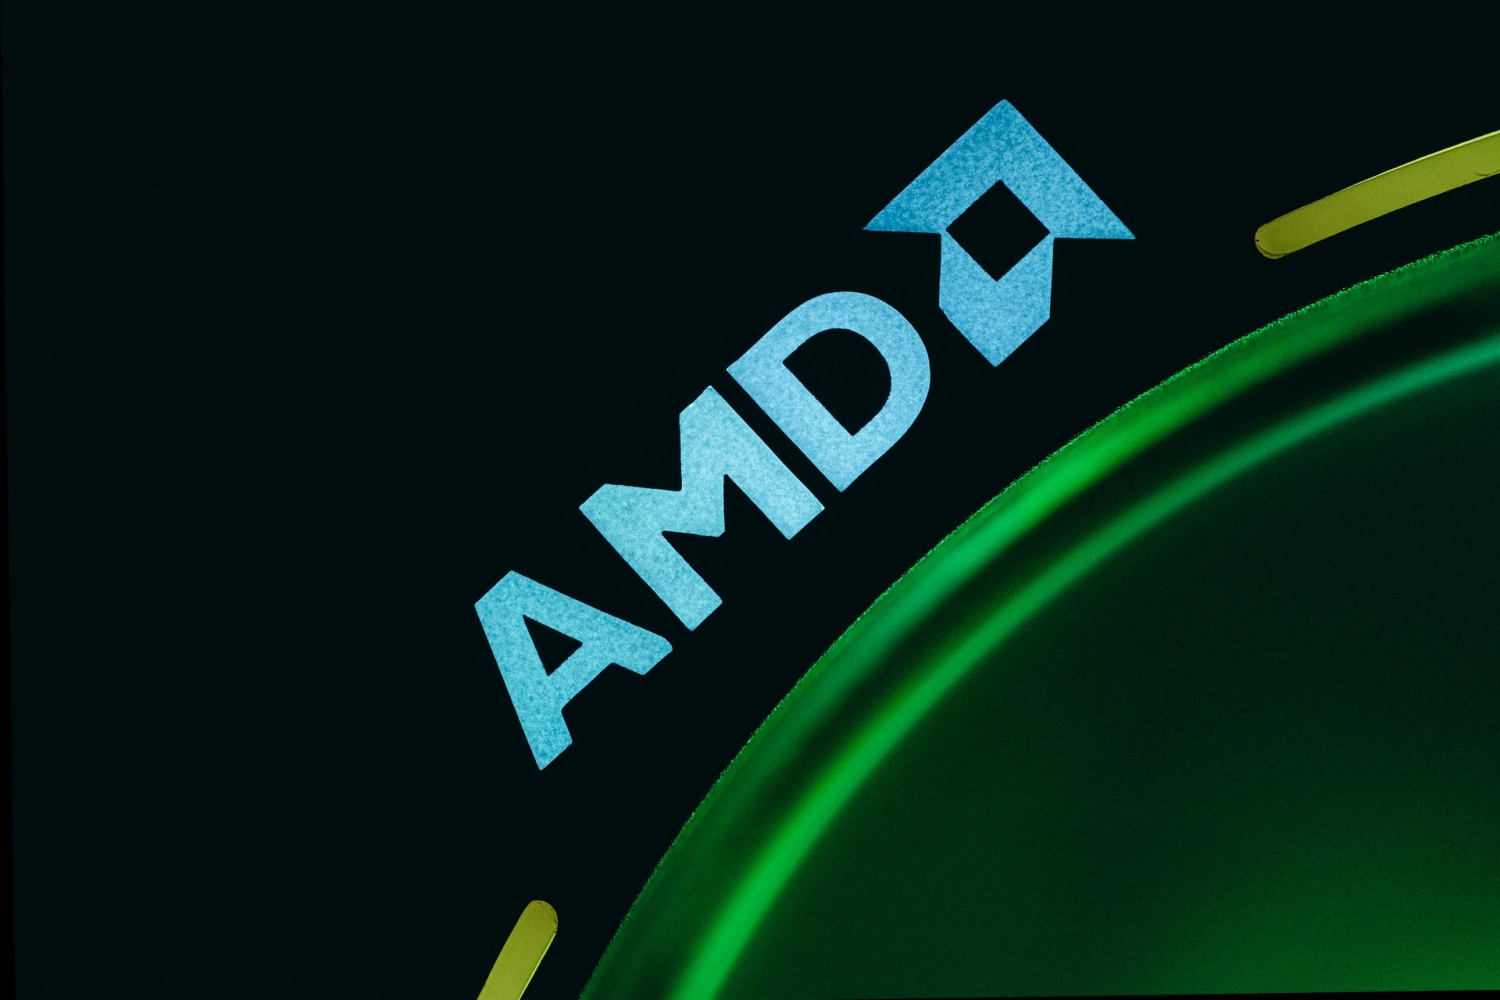 AMD Achieves 27.7% Market Share for Desktop PC CPUs Amidst Market Falling Over 30%